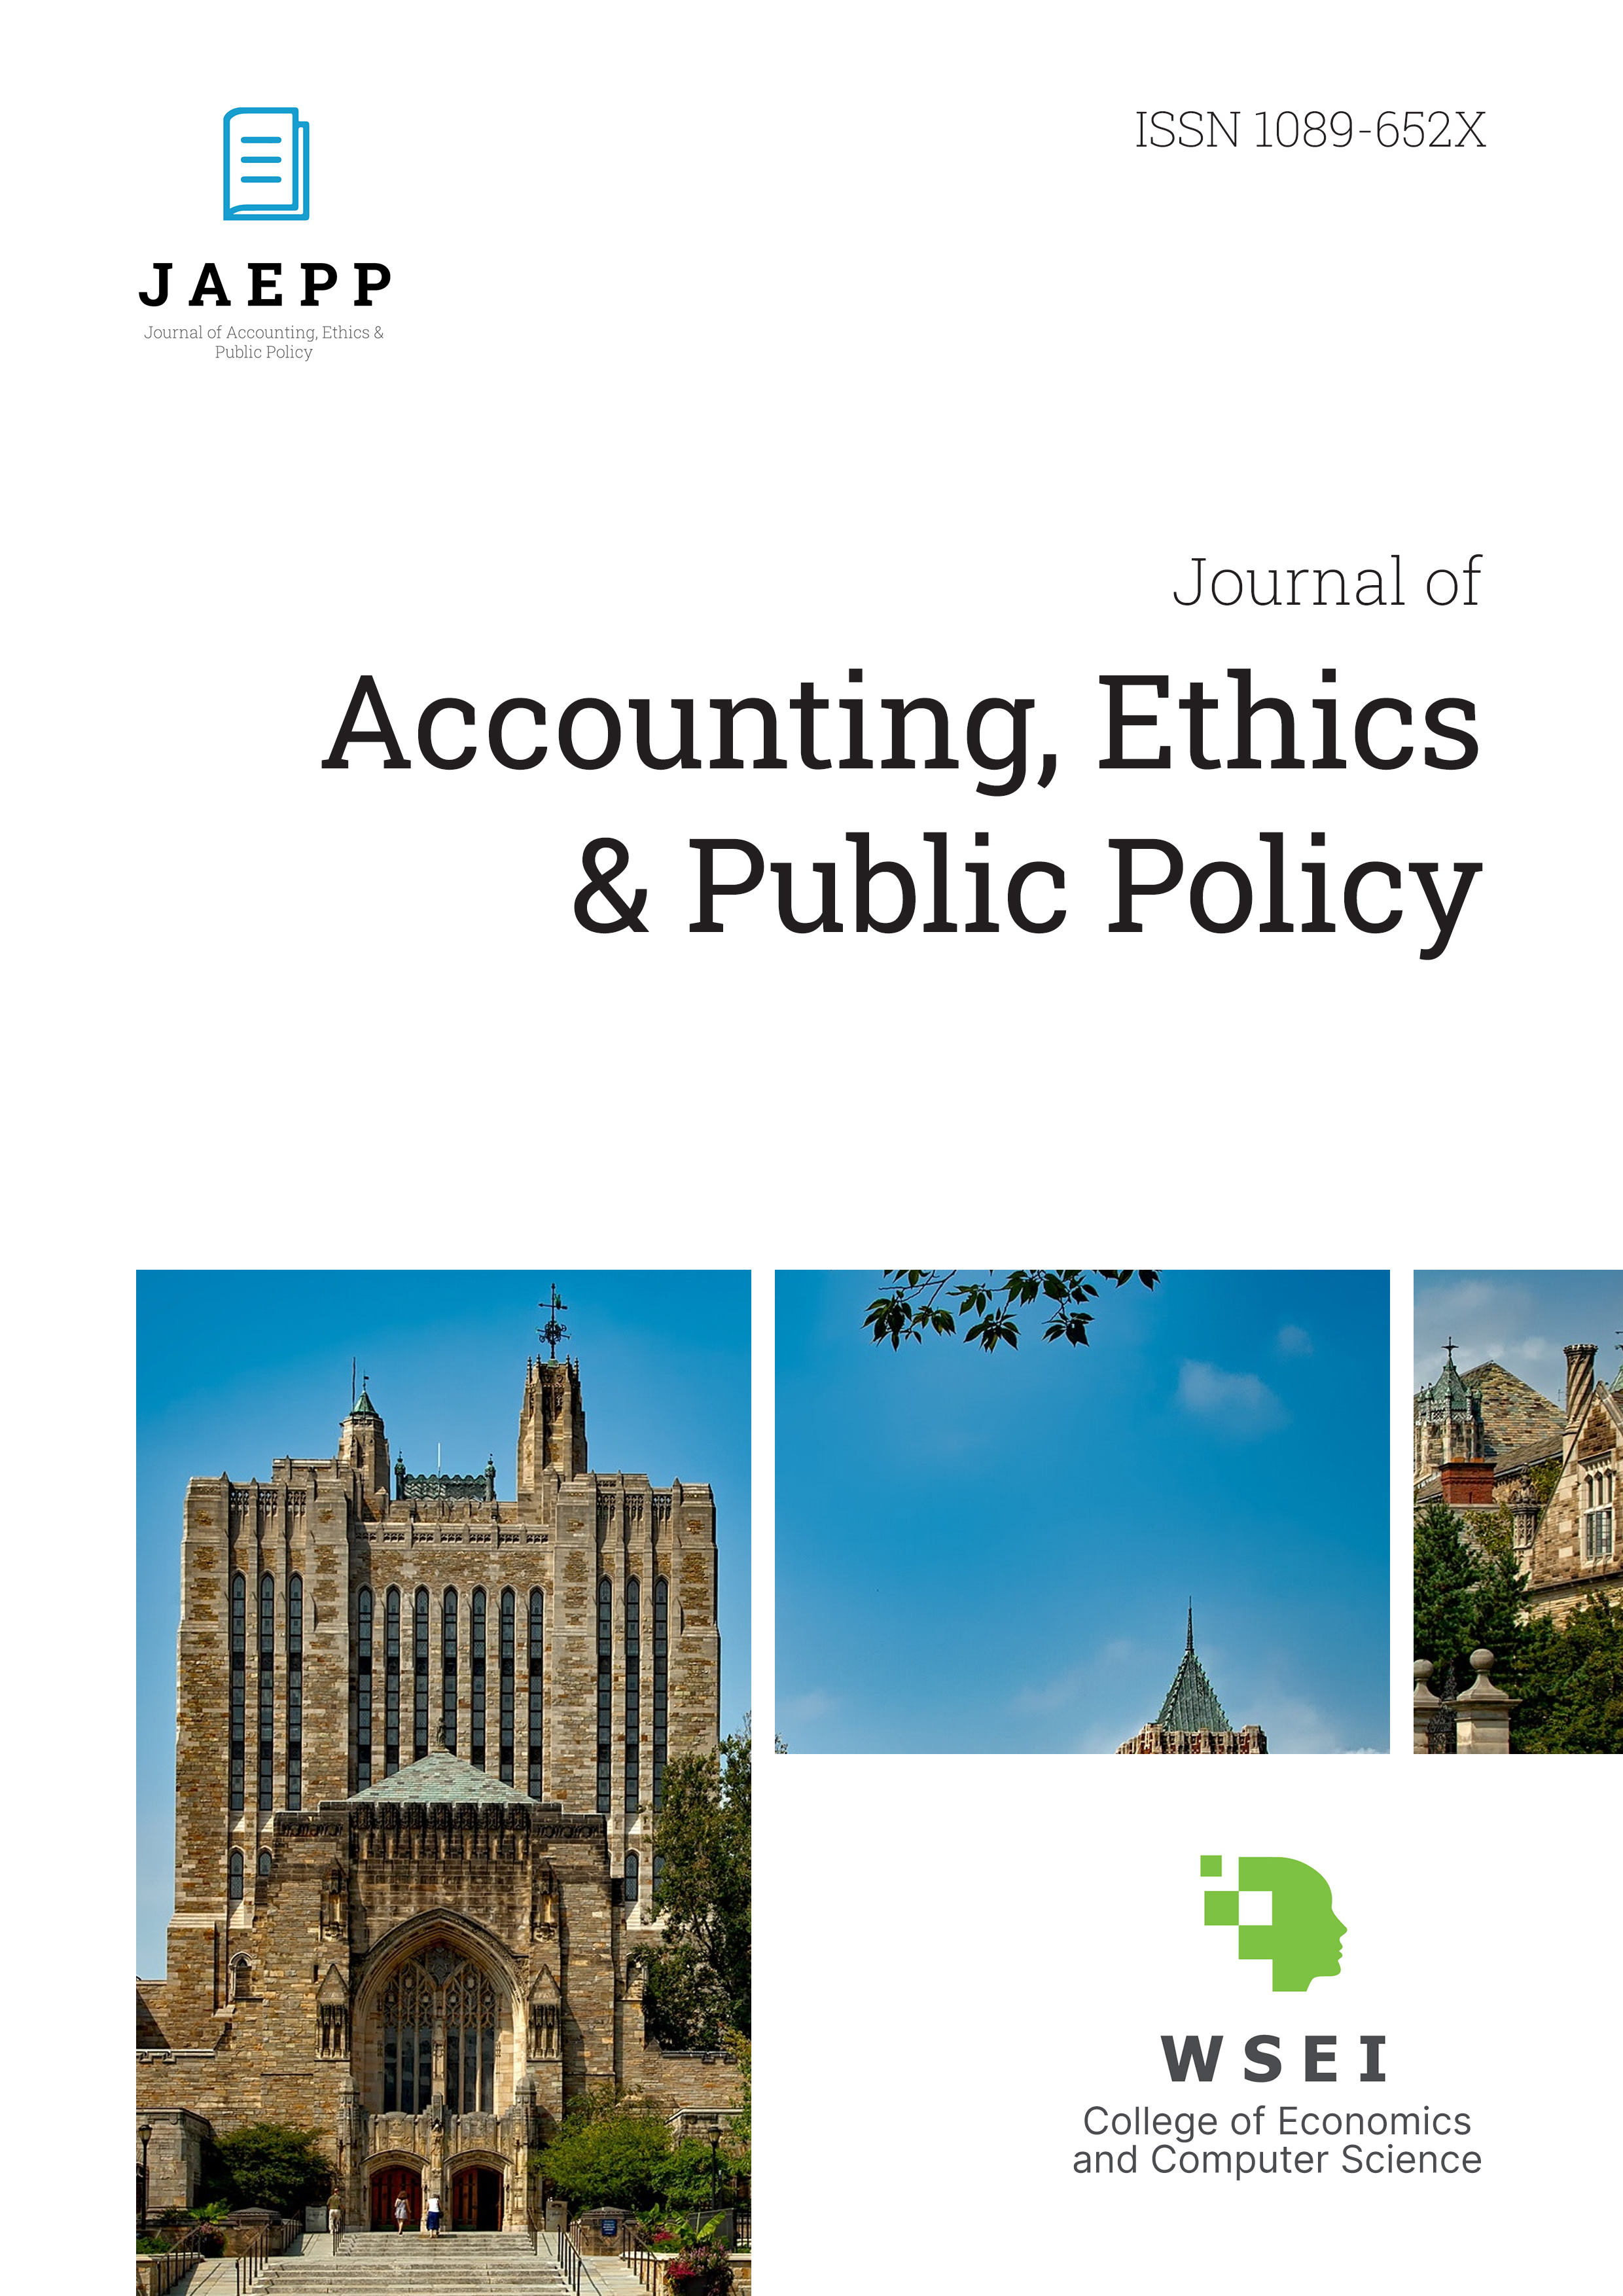 					View Vol. 19 No. 3 (2018): Journal of Accounting, Ethics & Public Policy, JAEPP
				